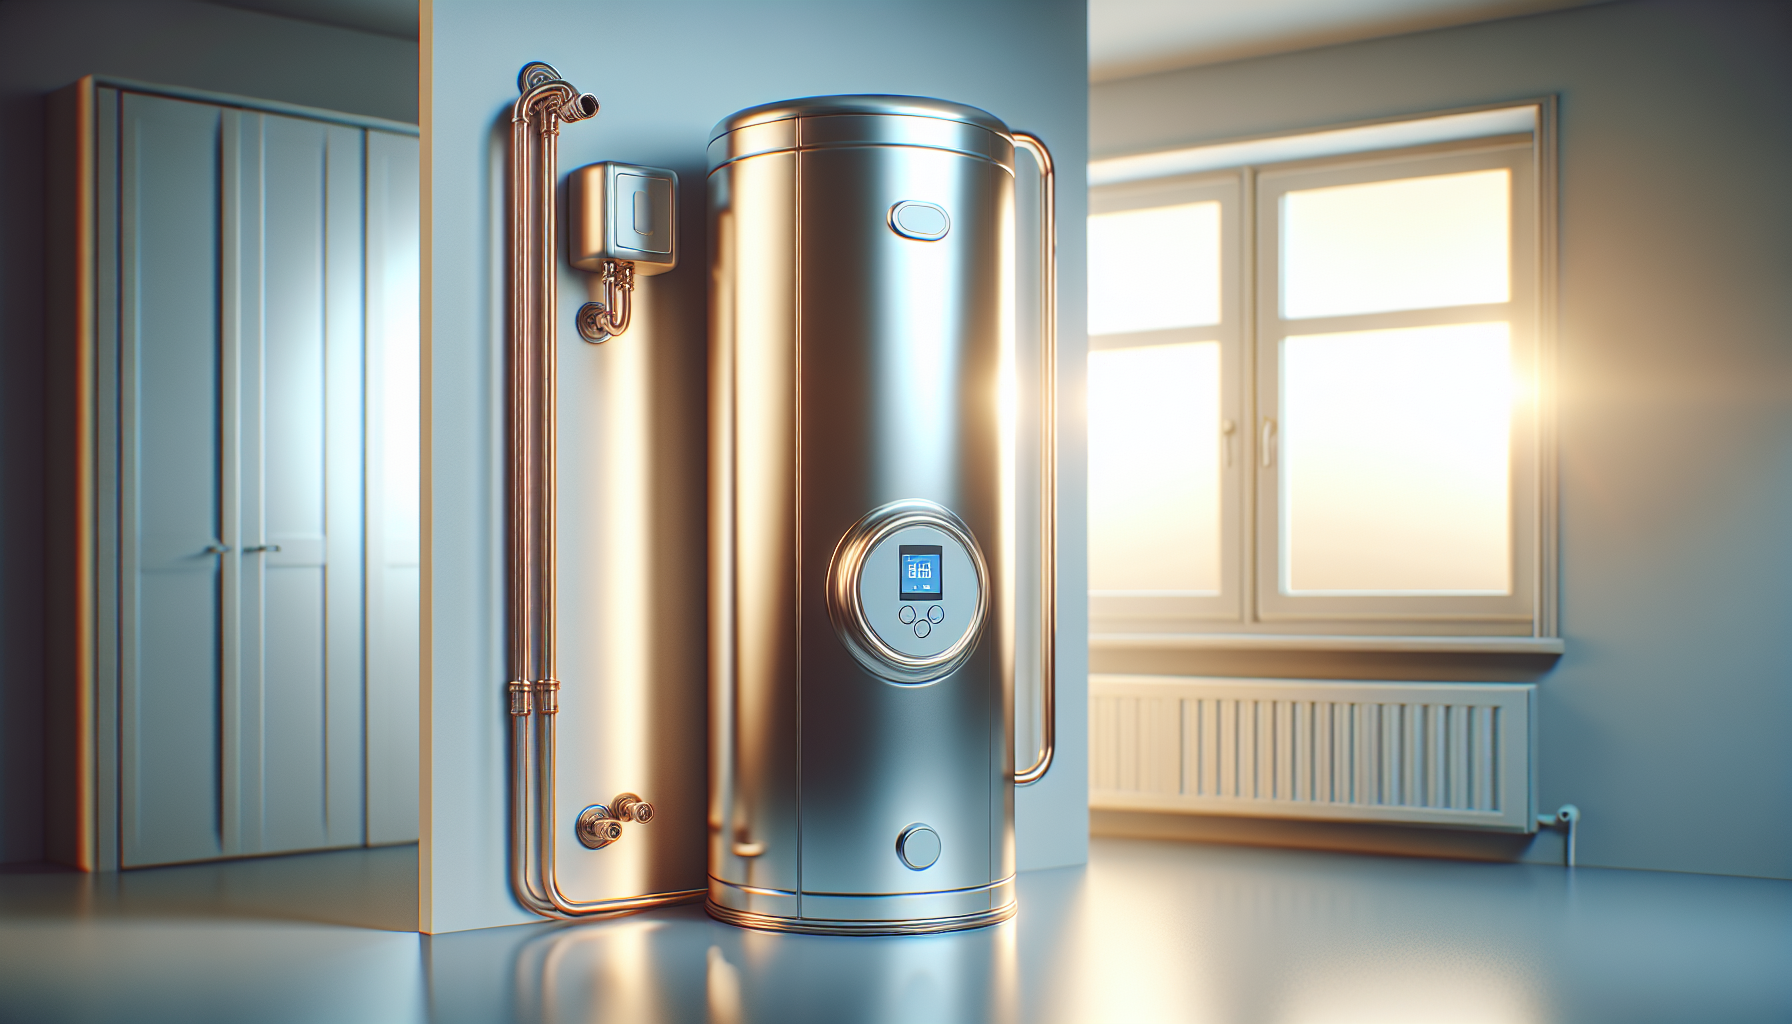 Stainless steel electric hot water system